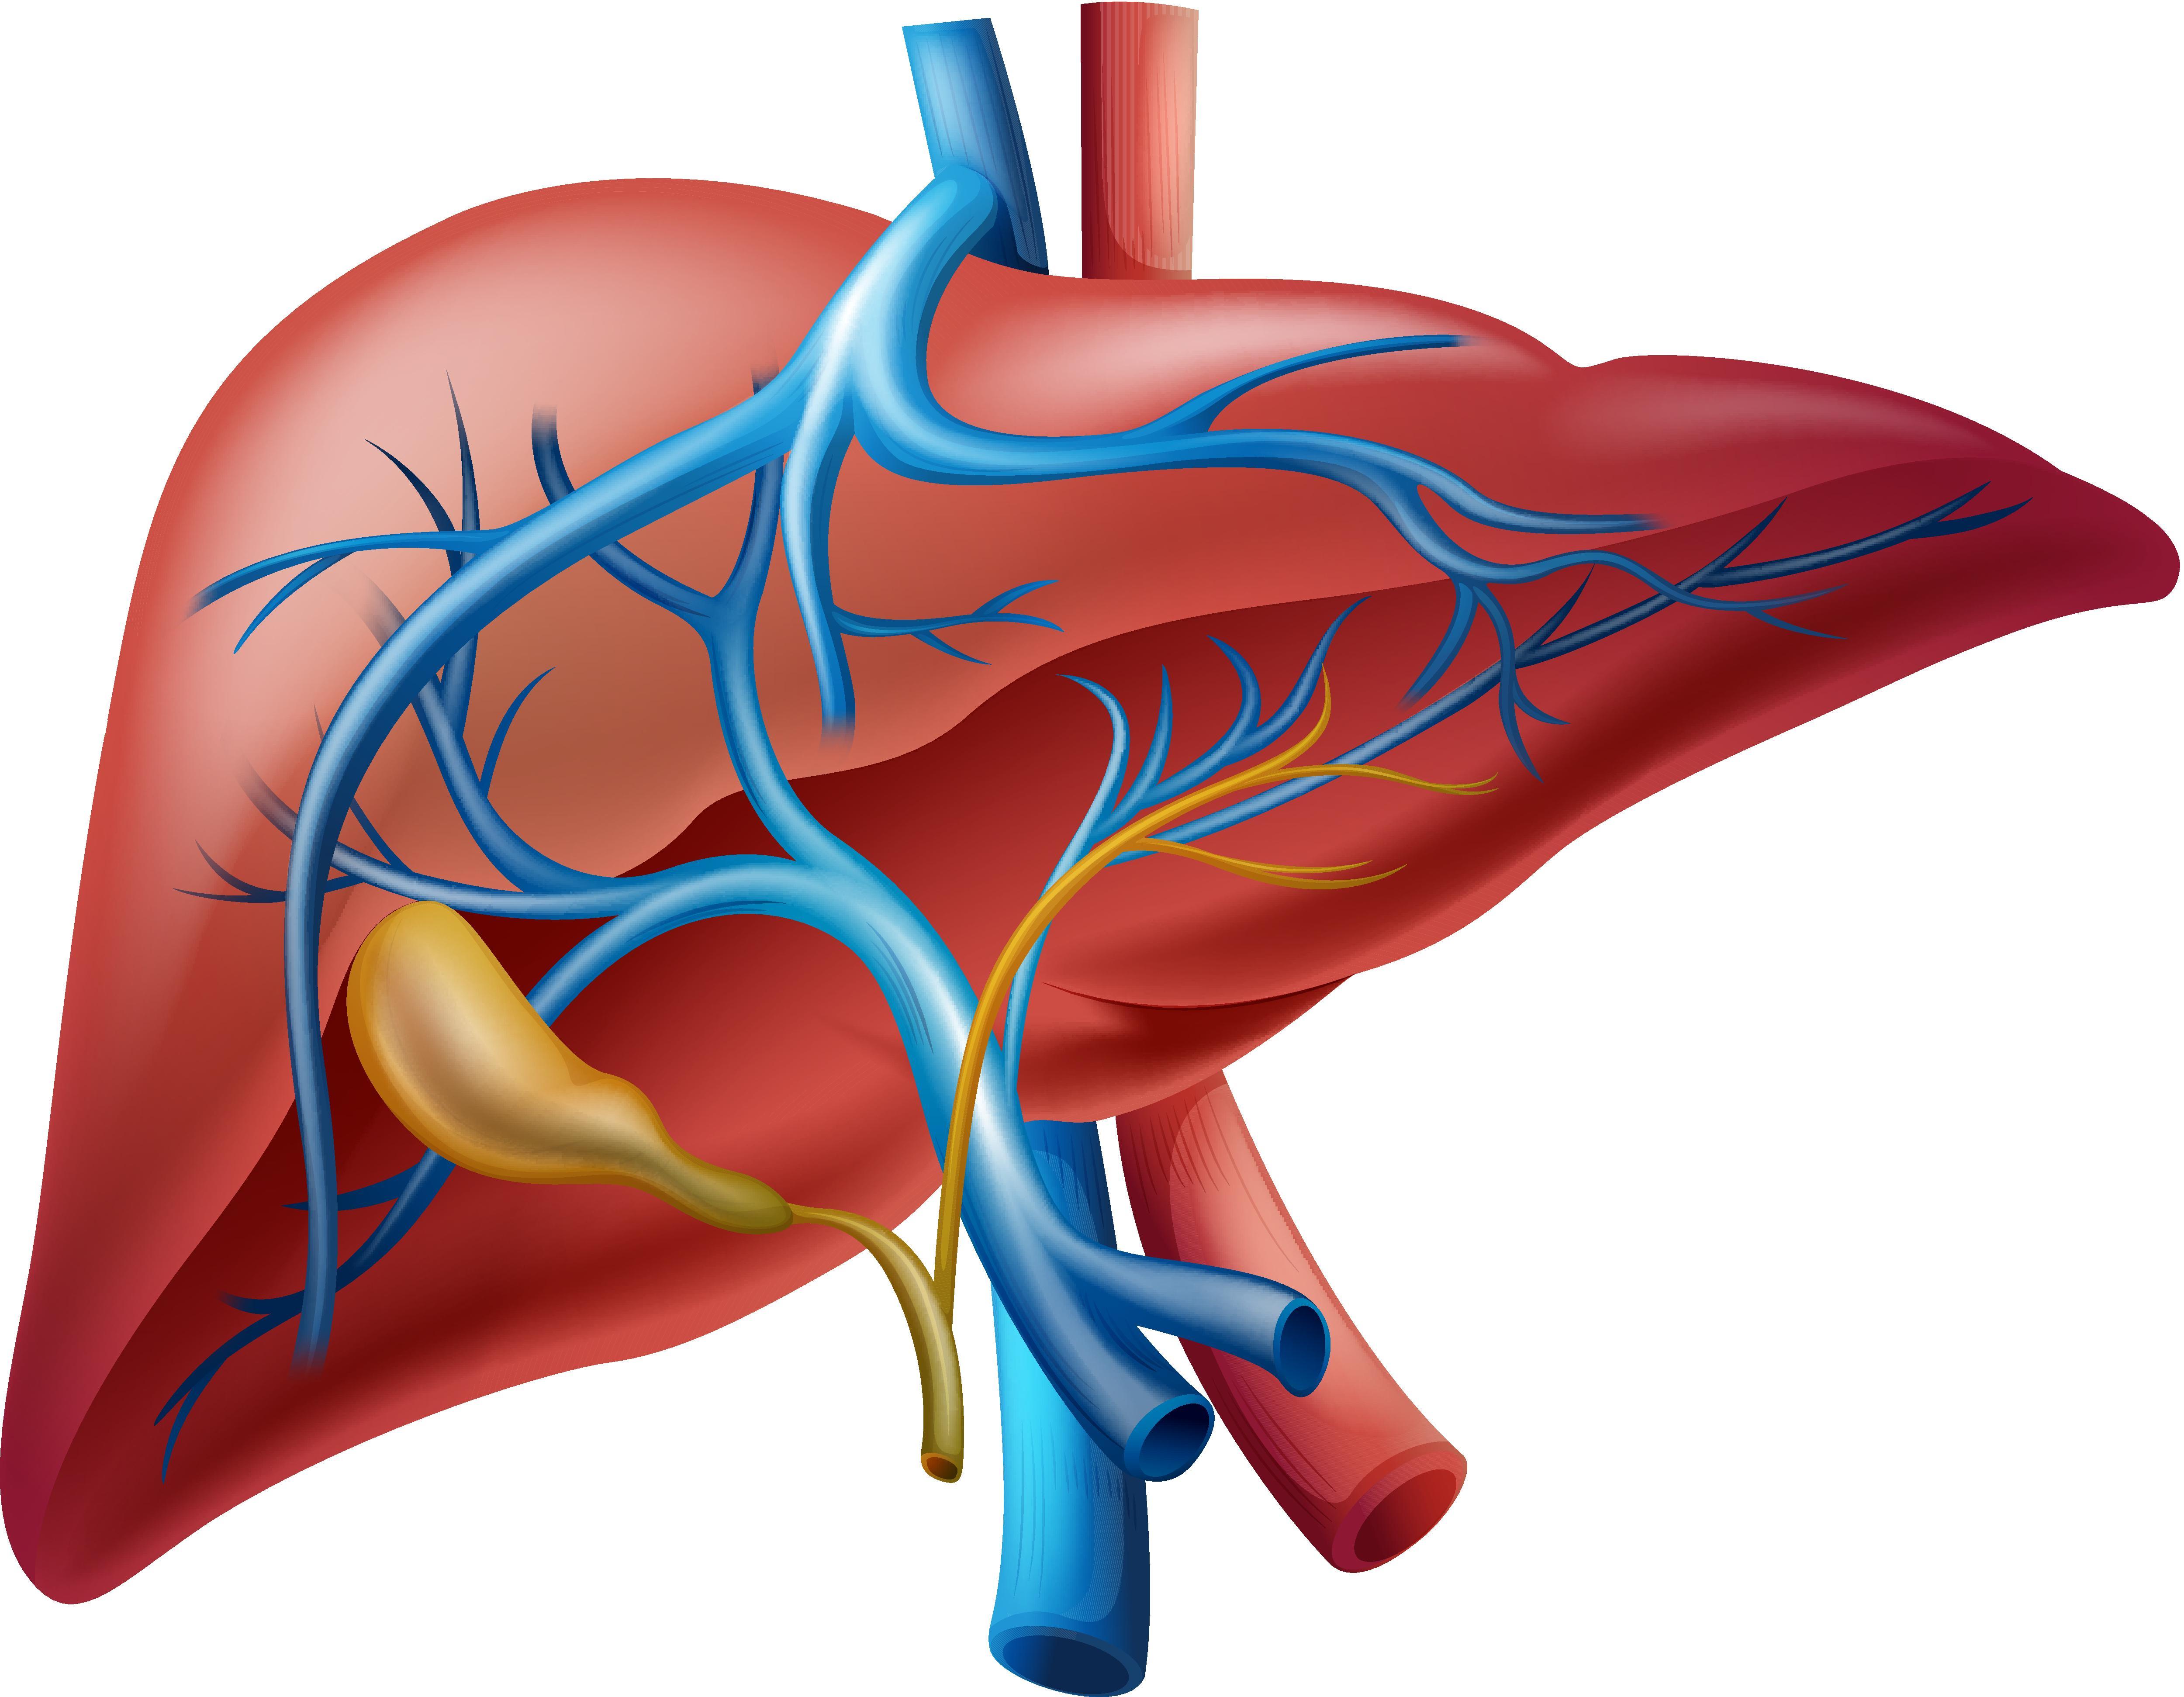 Hepatobiliary Surgery and Nutrition：使用机器学习策略预测和验证肝内胆管癌的预后<font color="red">甲基化</font>评分